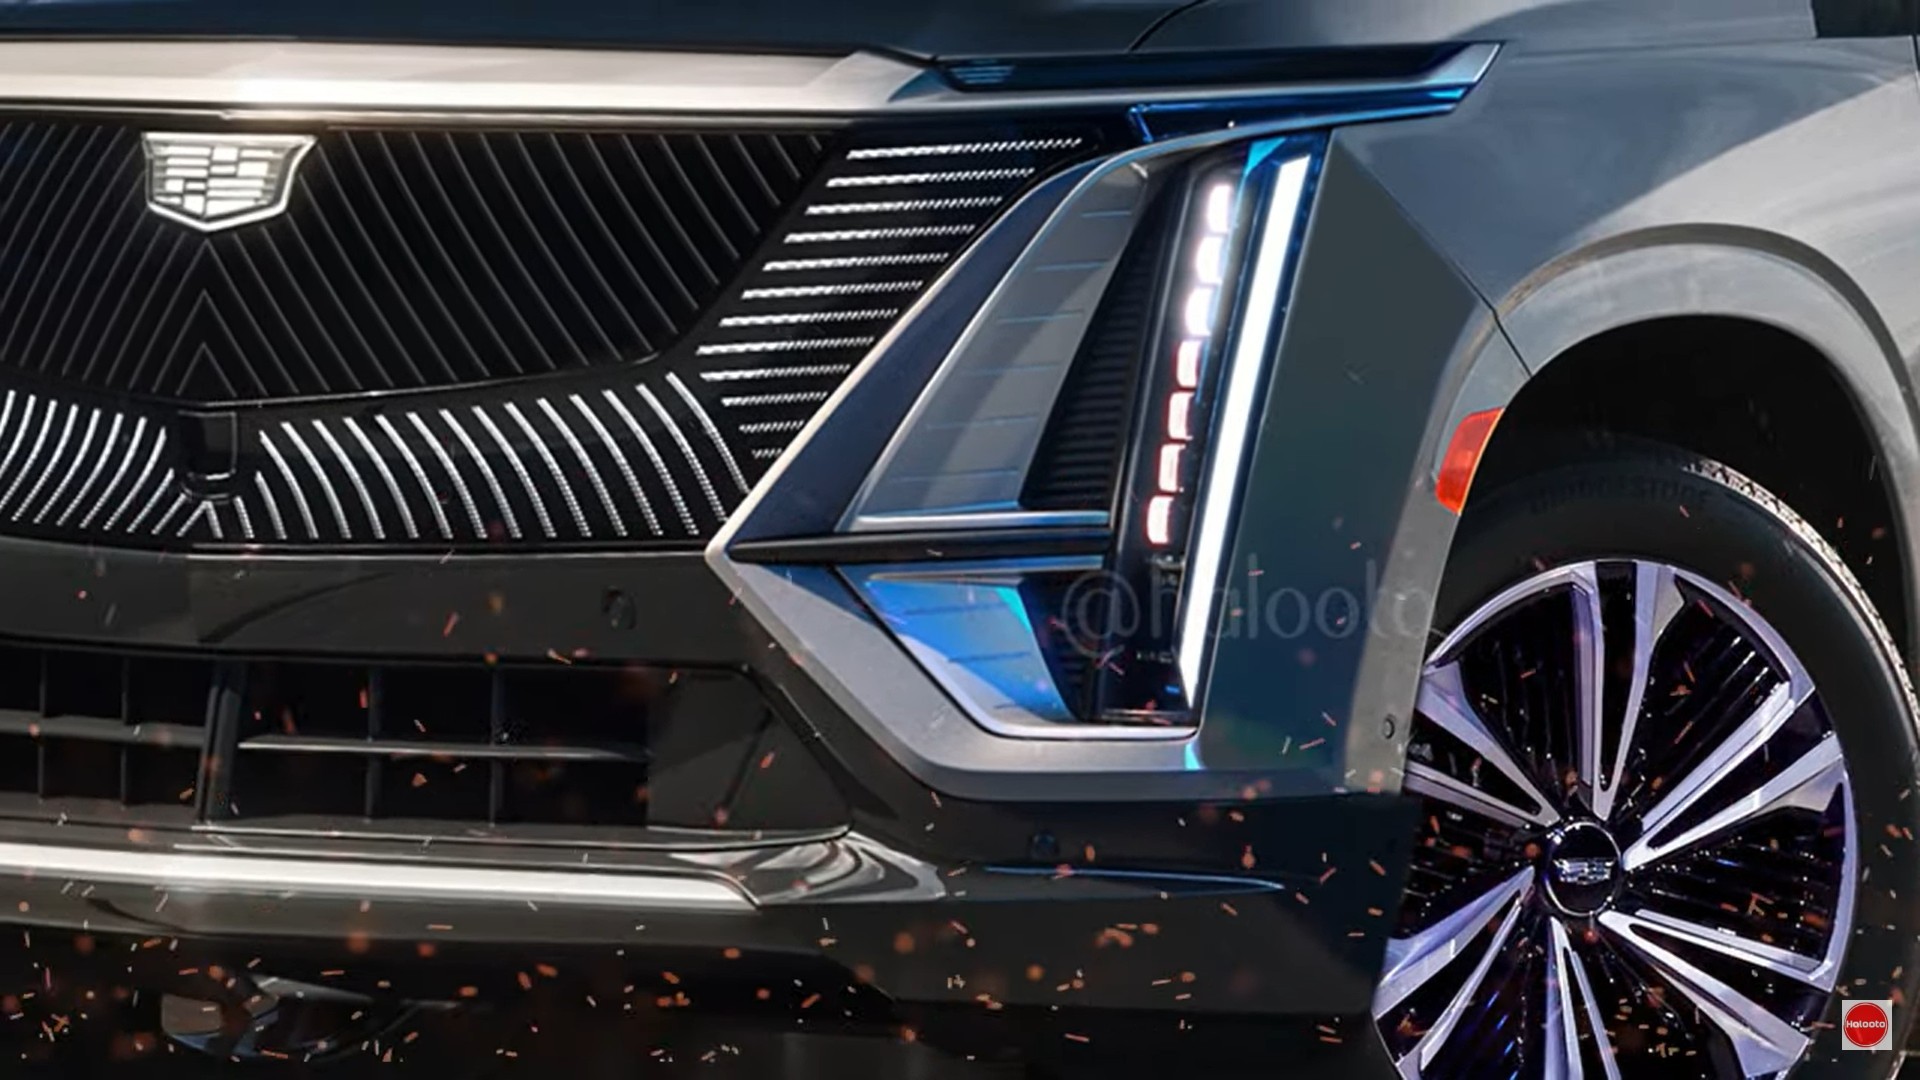 2024 Cadillac Escalade IQ AllElectric SUV Interior Reveal Isn't Real